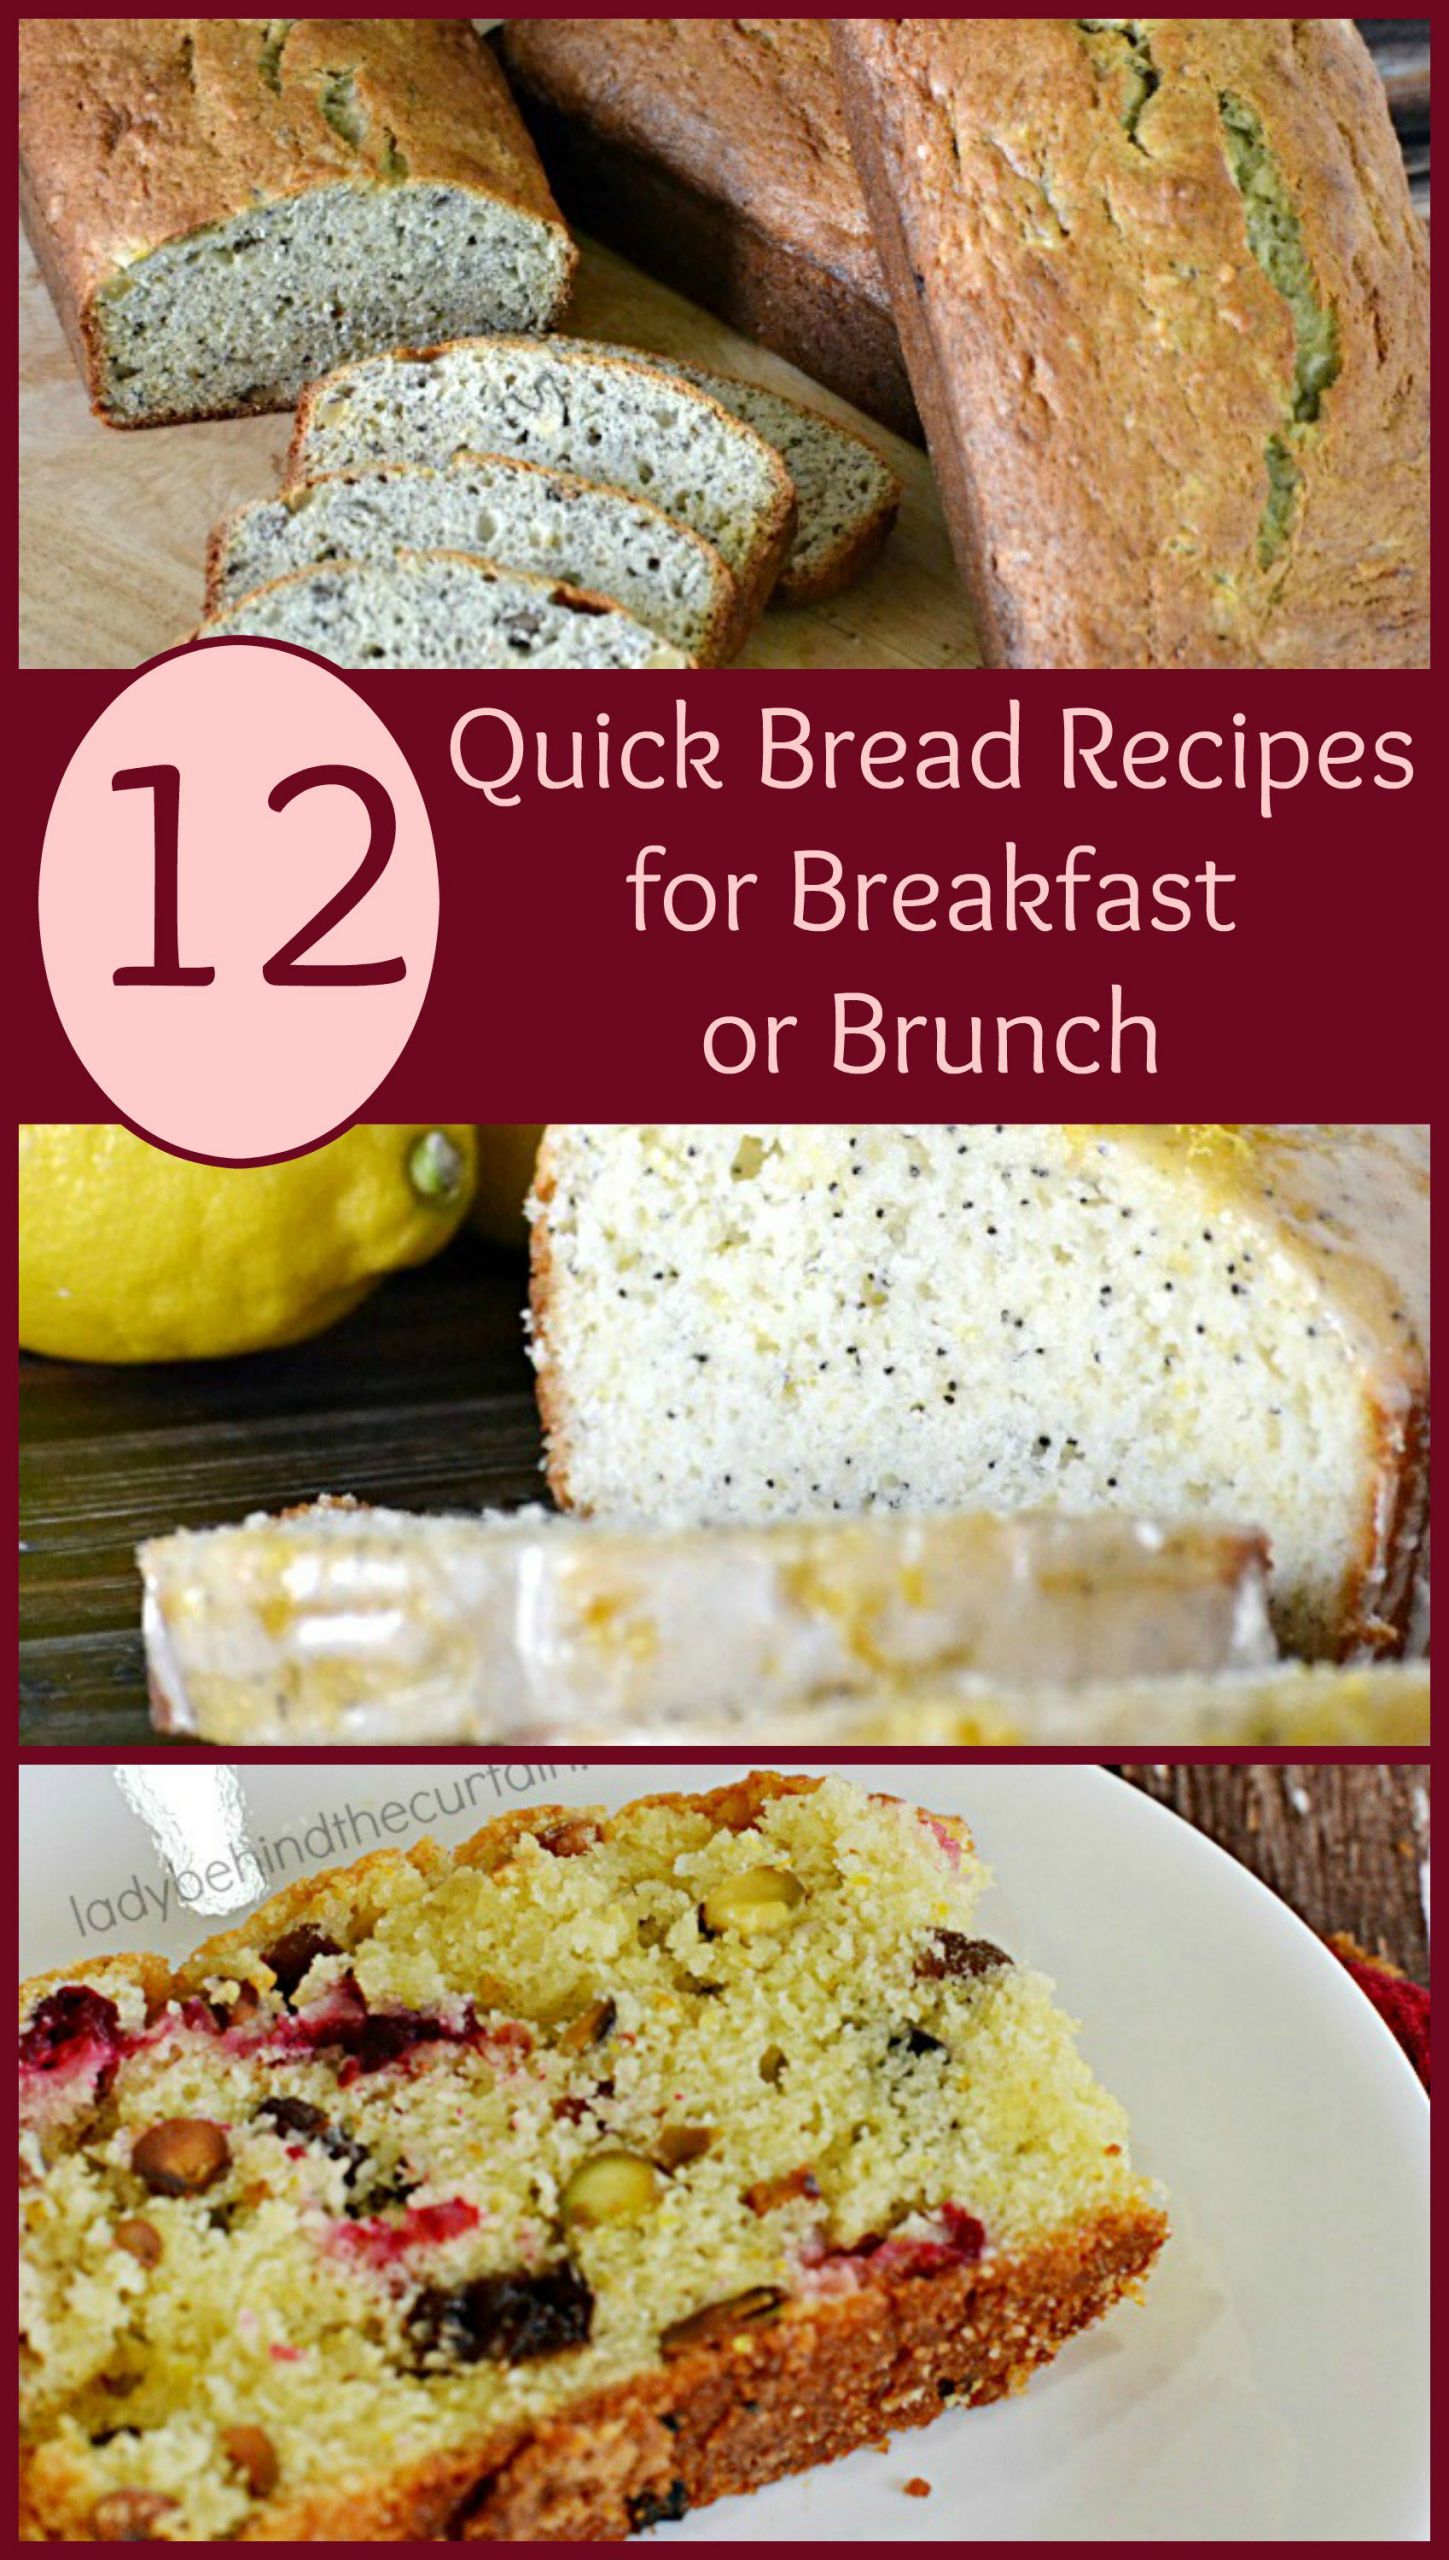 Quick Breakfast Recipes With Bread
 12 Quick Bread Recipes for Breakfast or Brunch